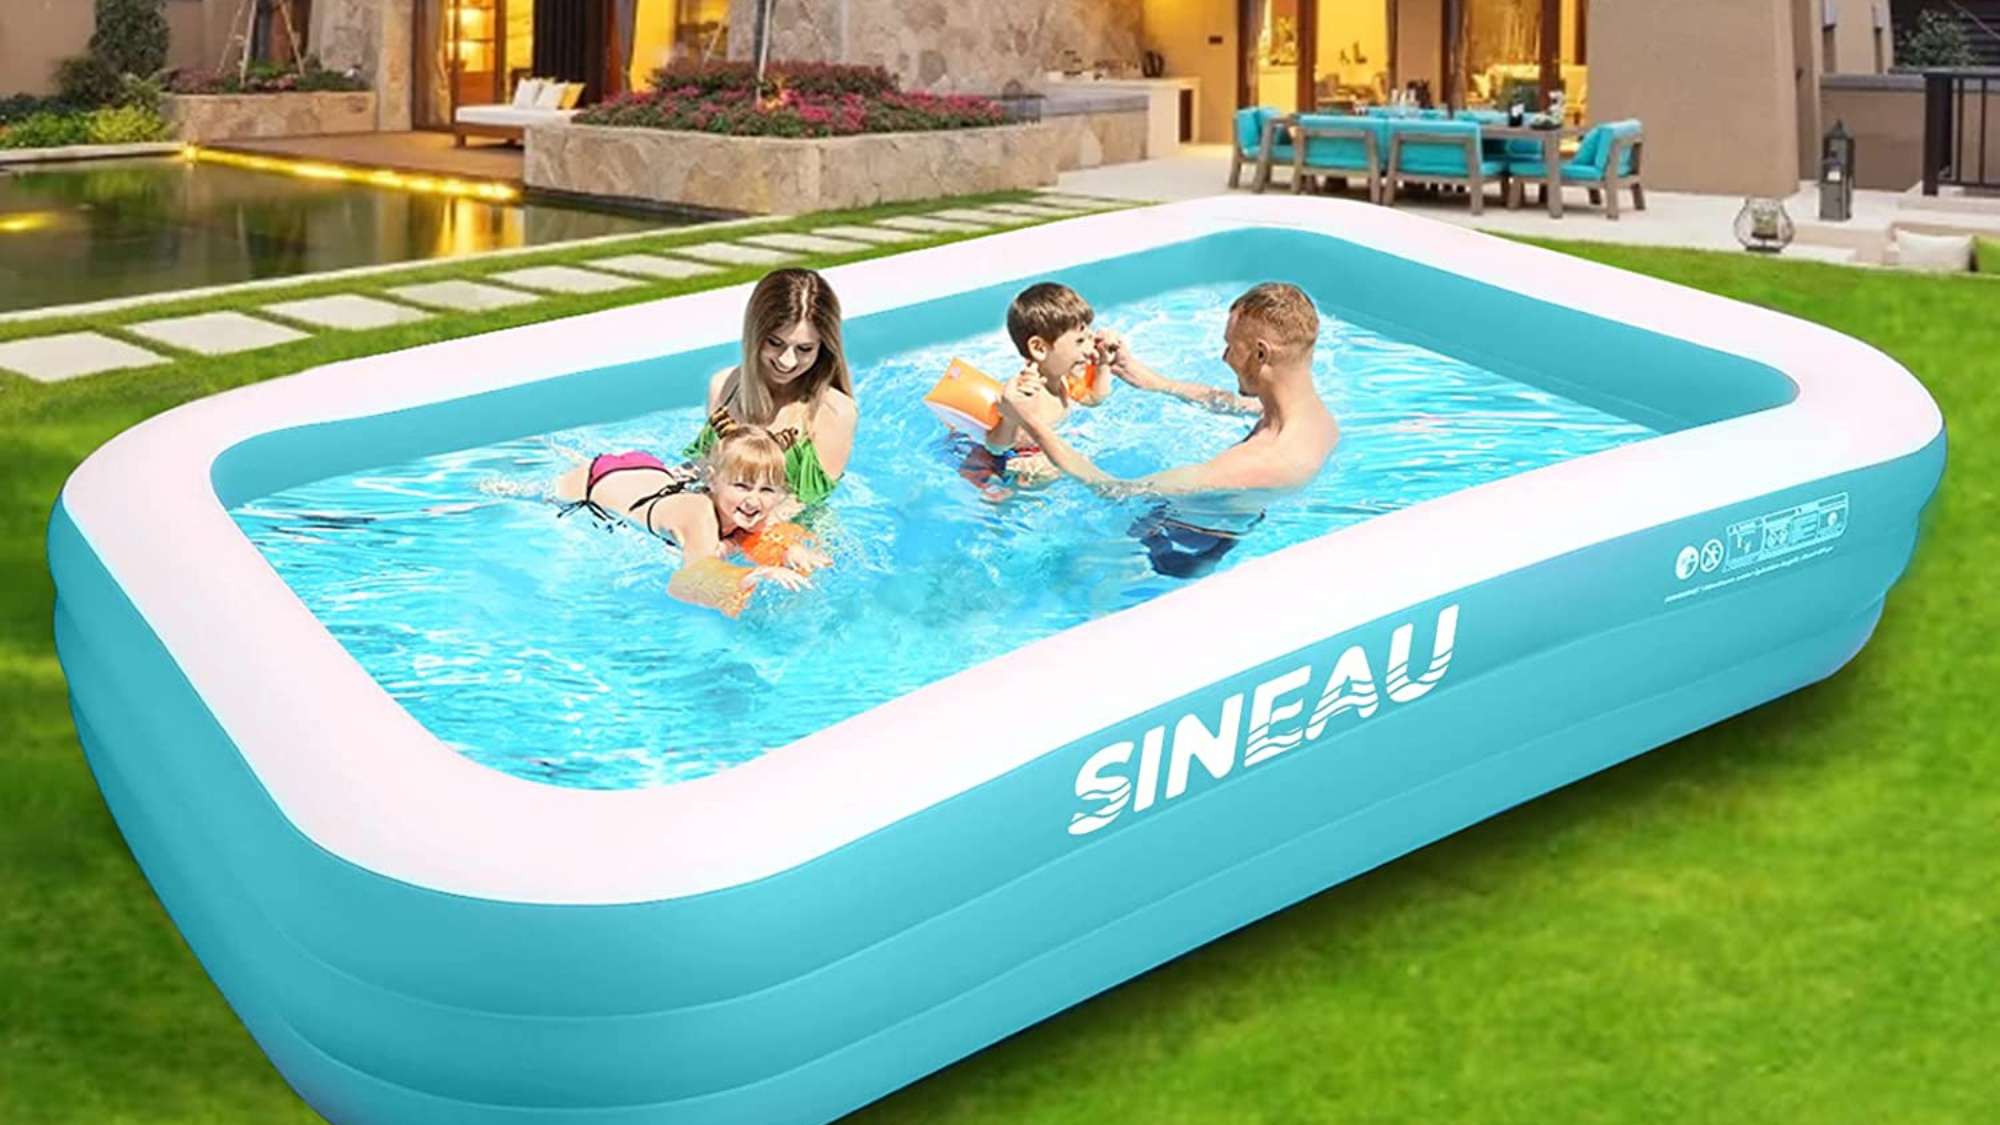 Image of SINEAU Inflatable Pool for Kids and Adults